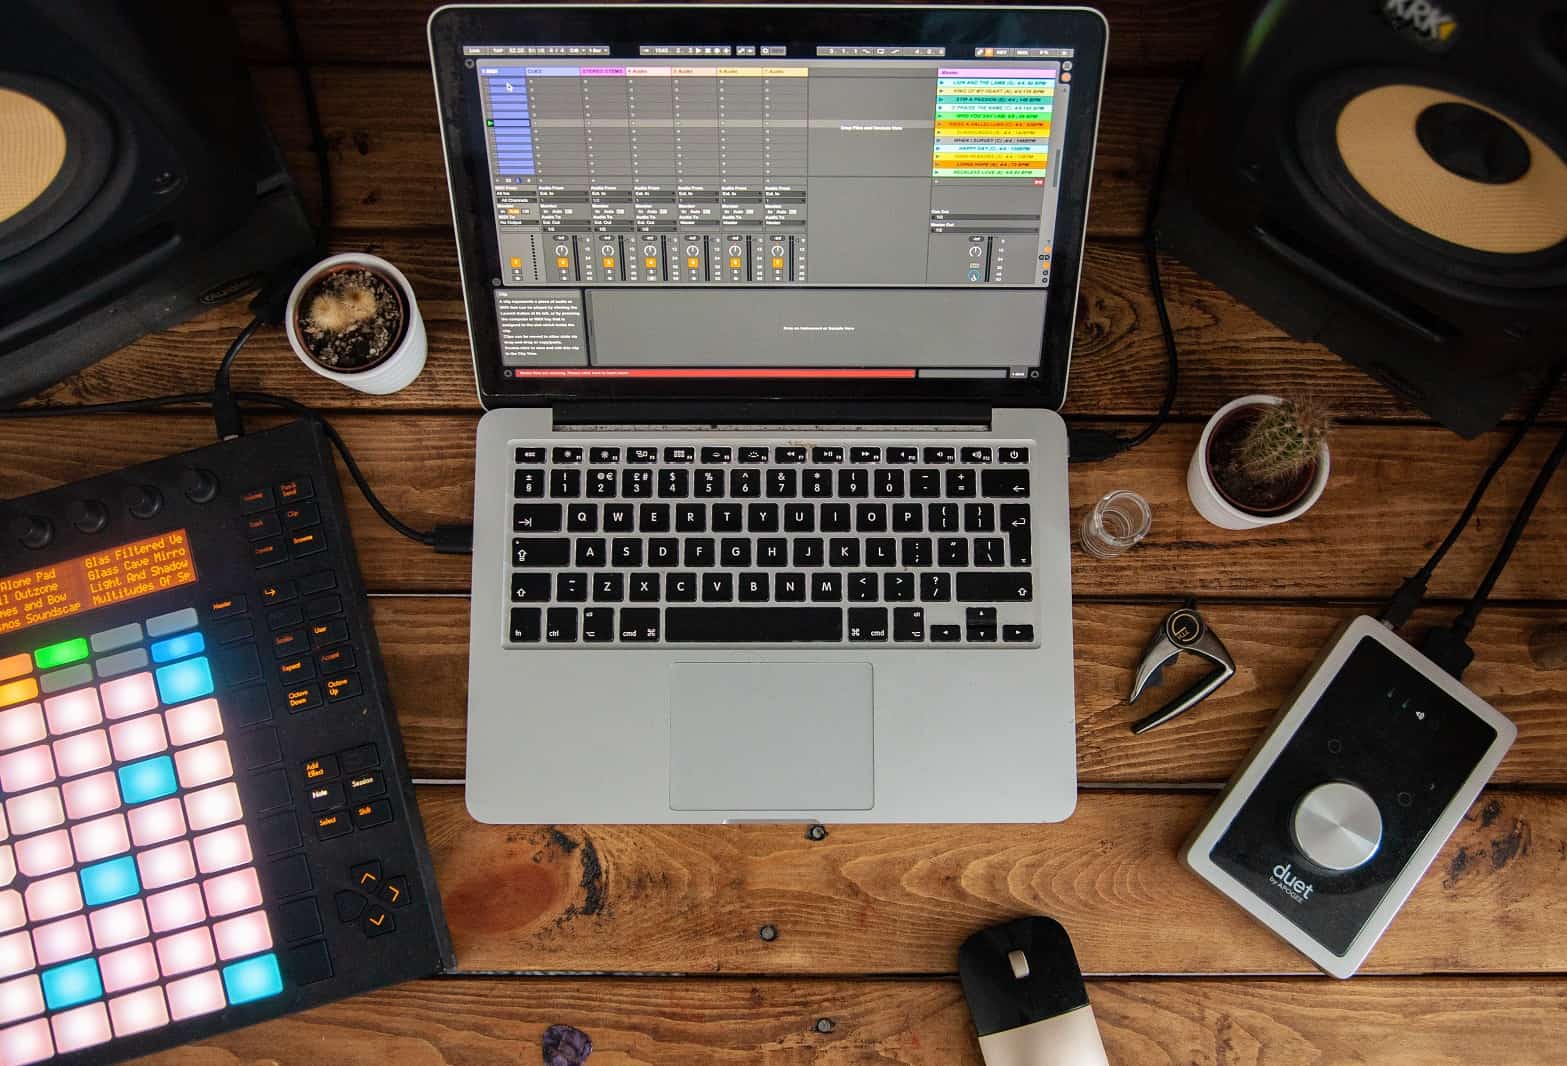 Ableton Live 11 is currently available for 20% off